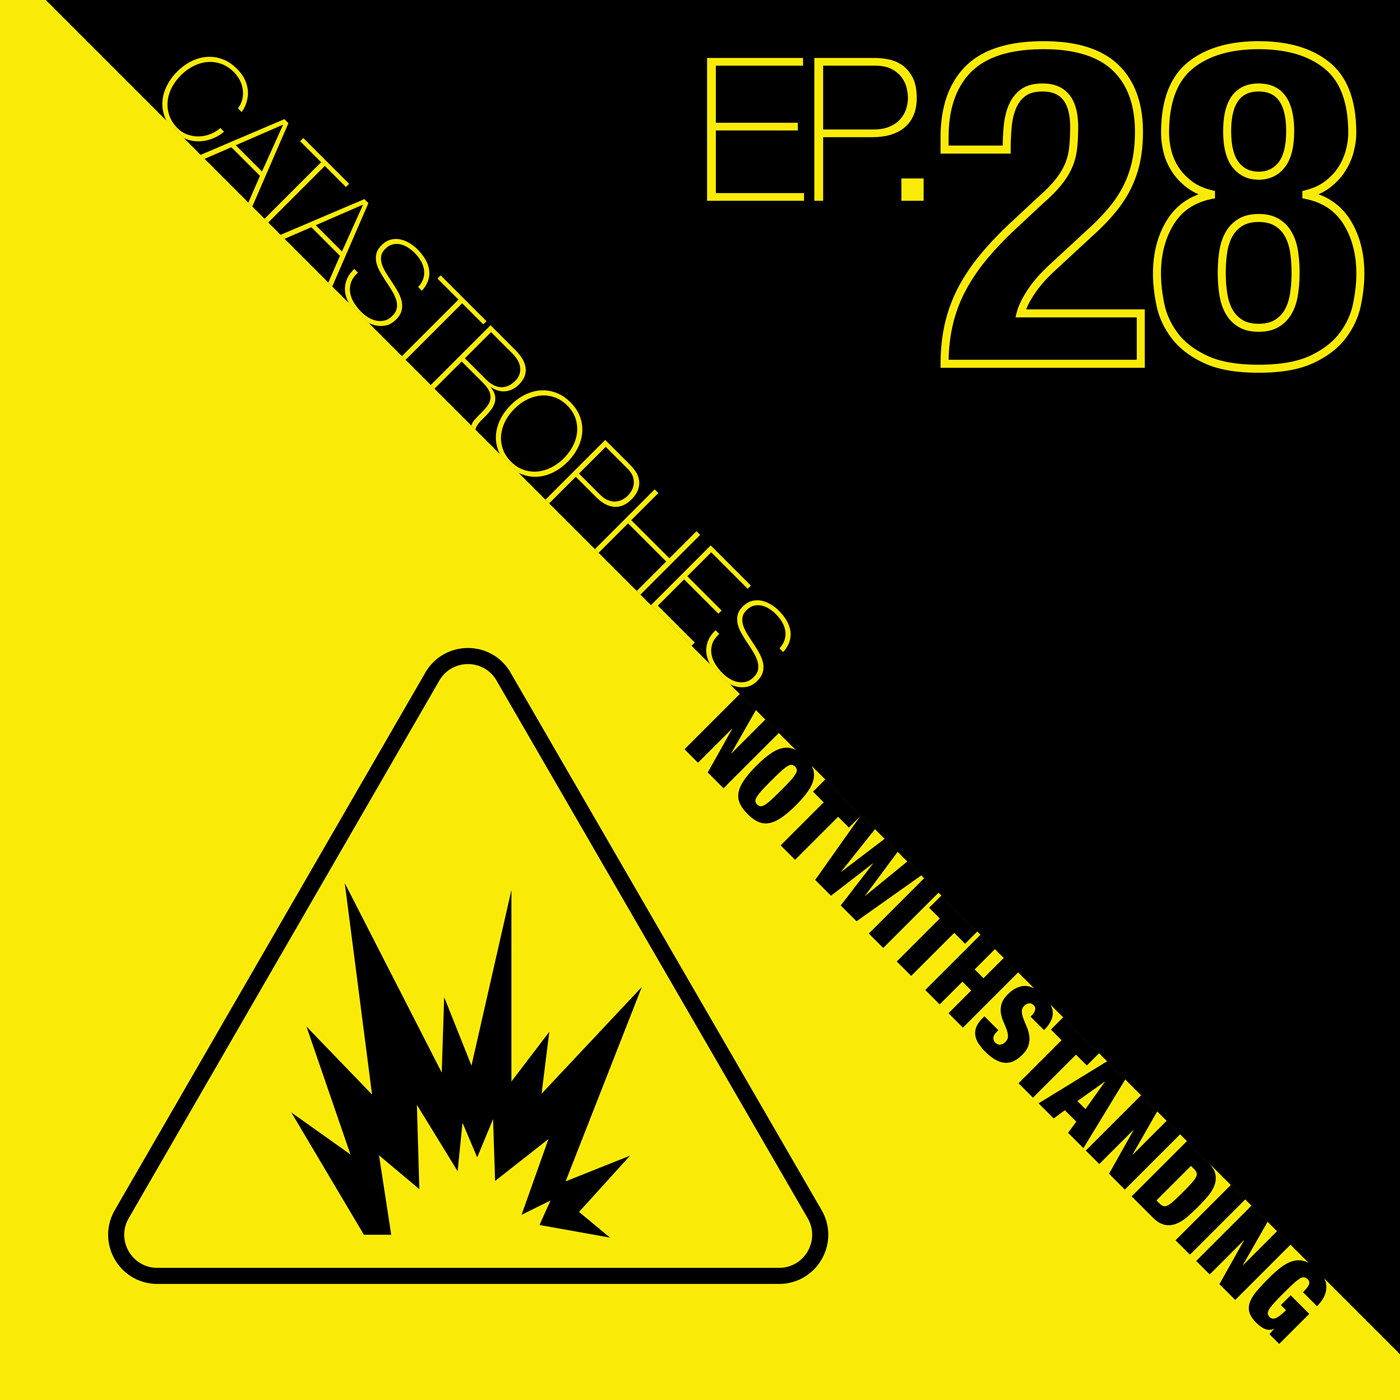 Cover Image of Catastrophes Notwithstanding Episode 28